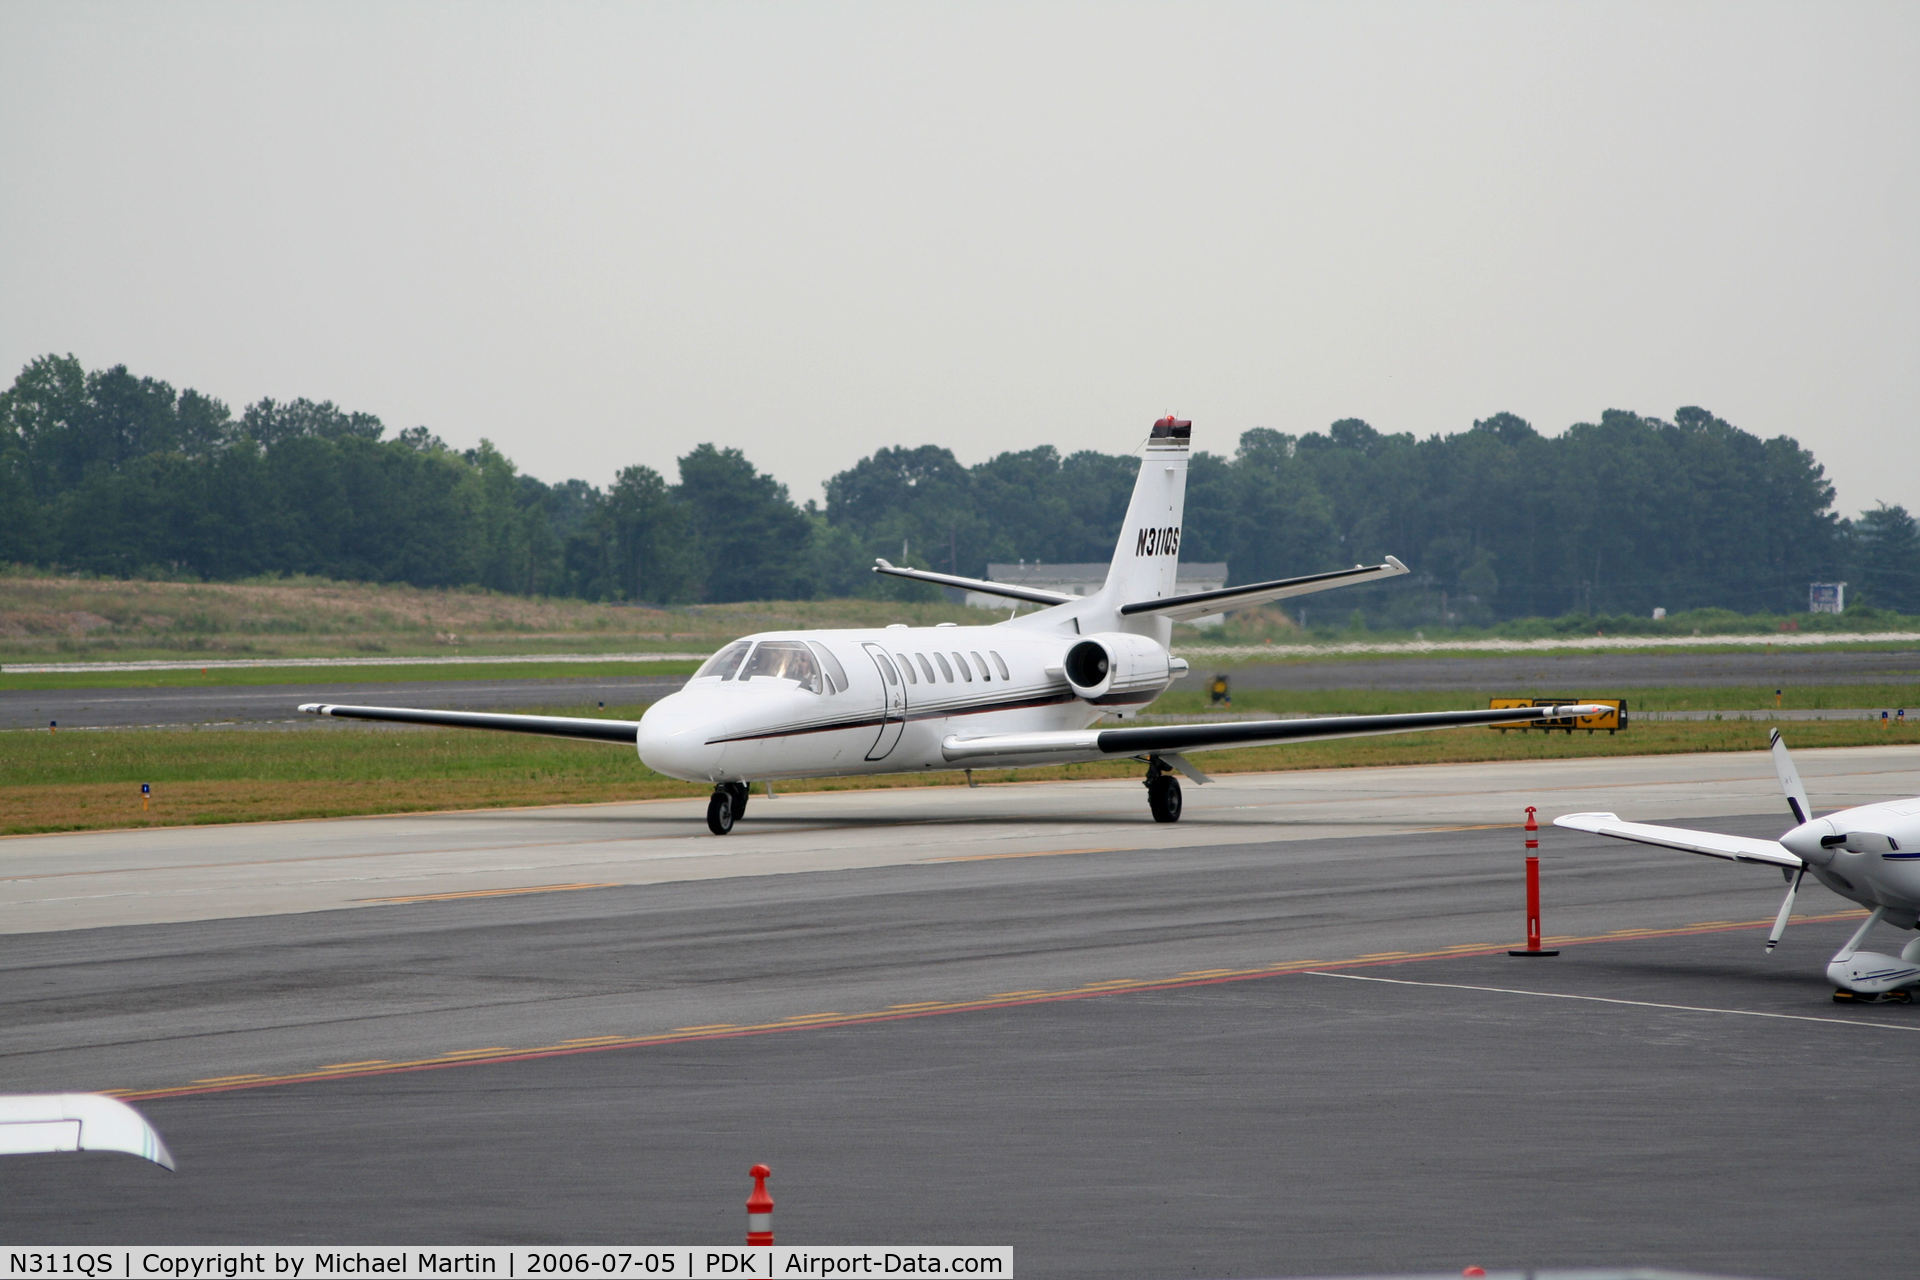 N311QS, 2008 Cessna 680 Citation Sovereign C/N 680-0196, Taxing to Signature Air